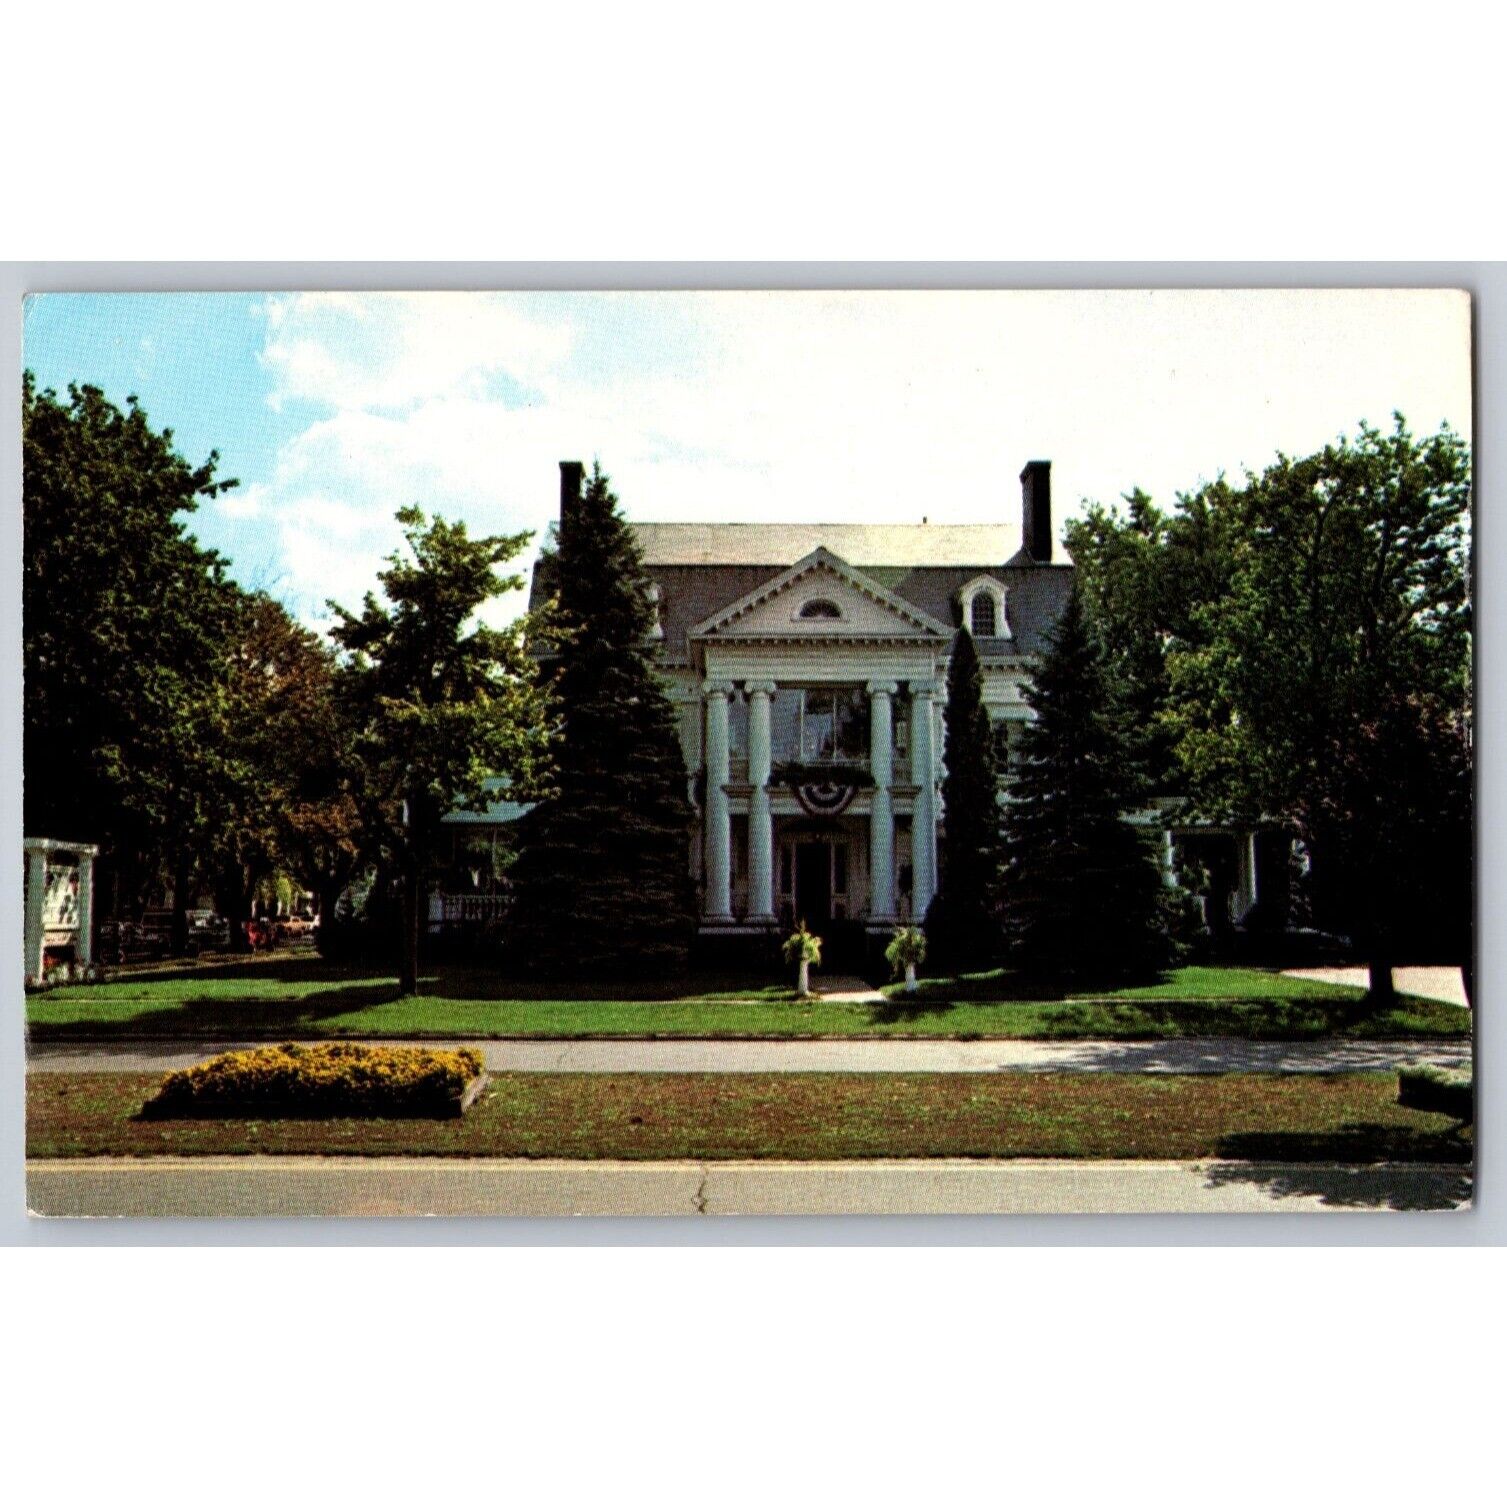 VTG Postcard  Unposted Michigan  Chesaning Heritage House On the Boulevard #515